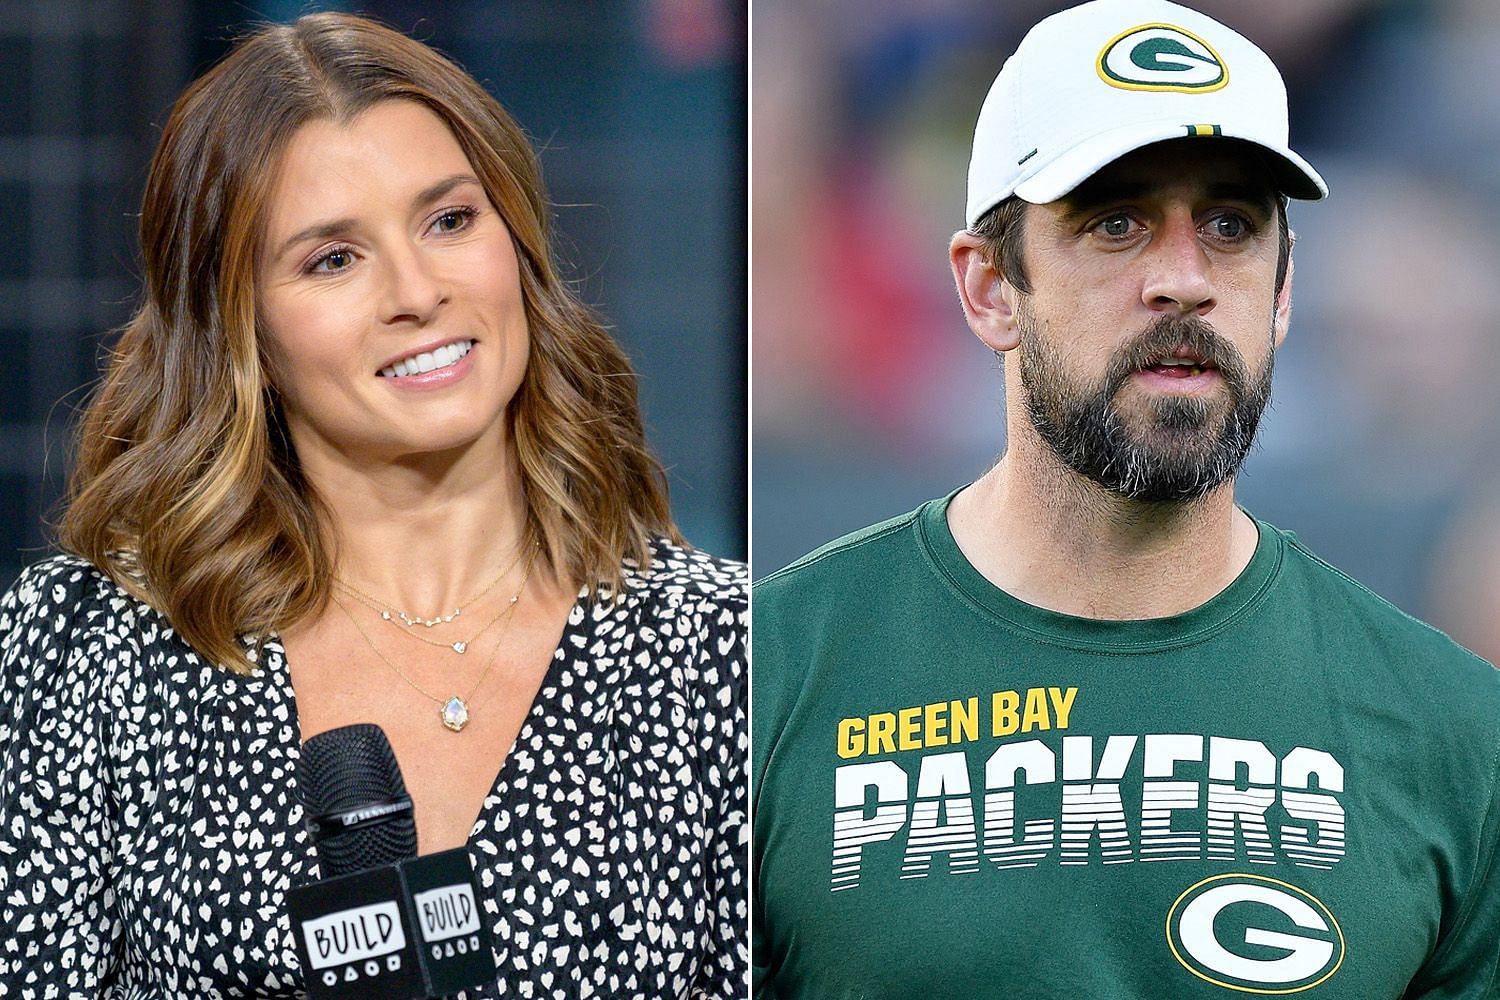 Packers quarterback Aaron Rodgers and ex-girlfriend former NASCAR driver Danica Patrick